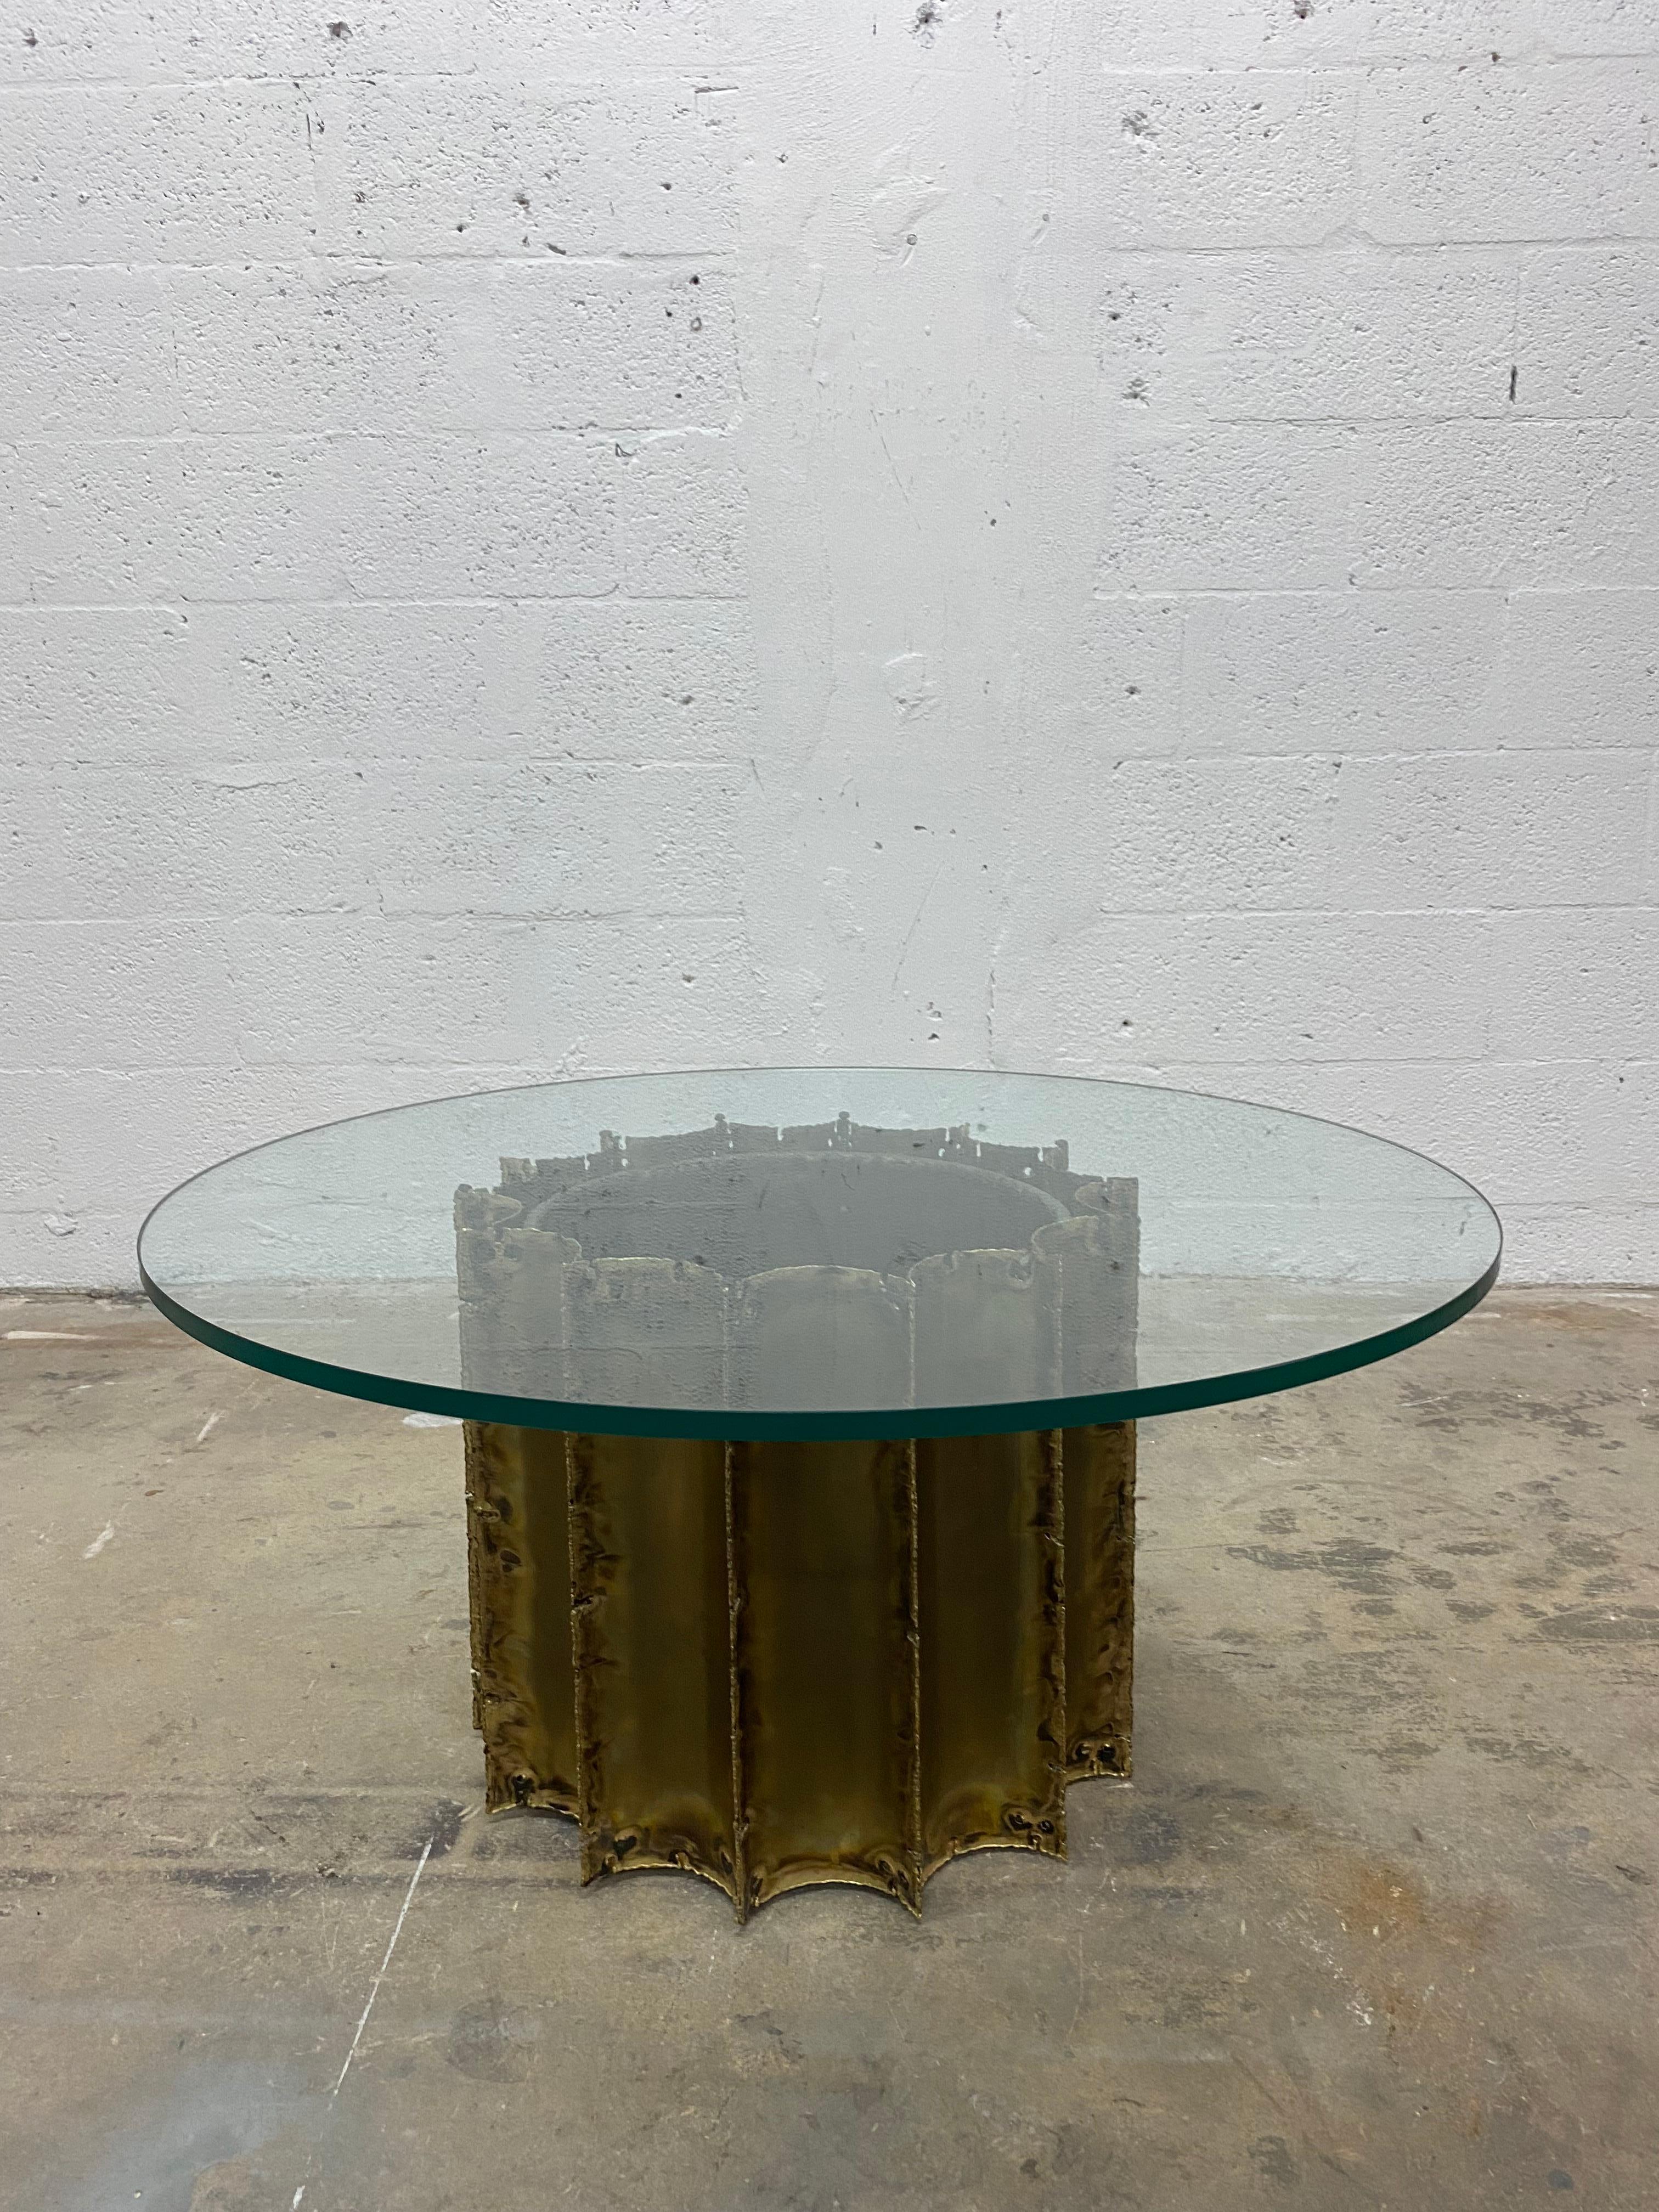 Torch cut brass brutalist base with smoked glass top coffee table by Tom Greene, 1970s.